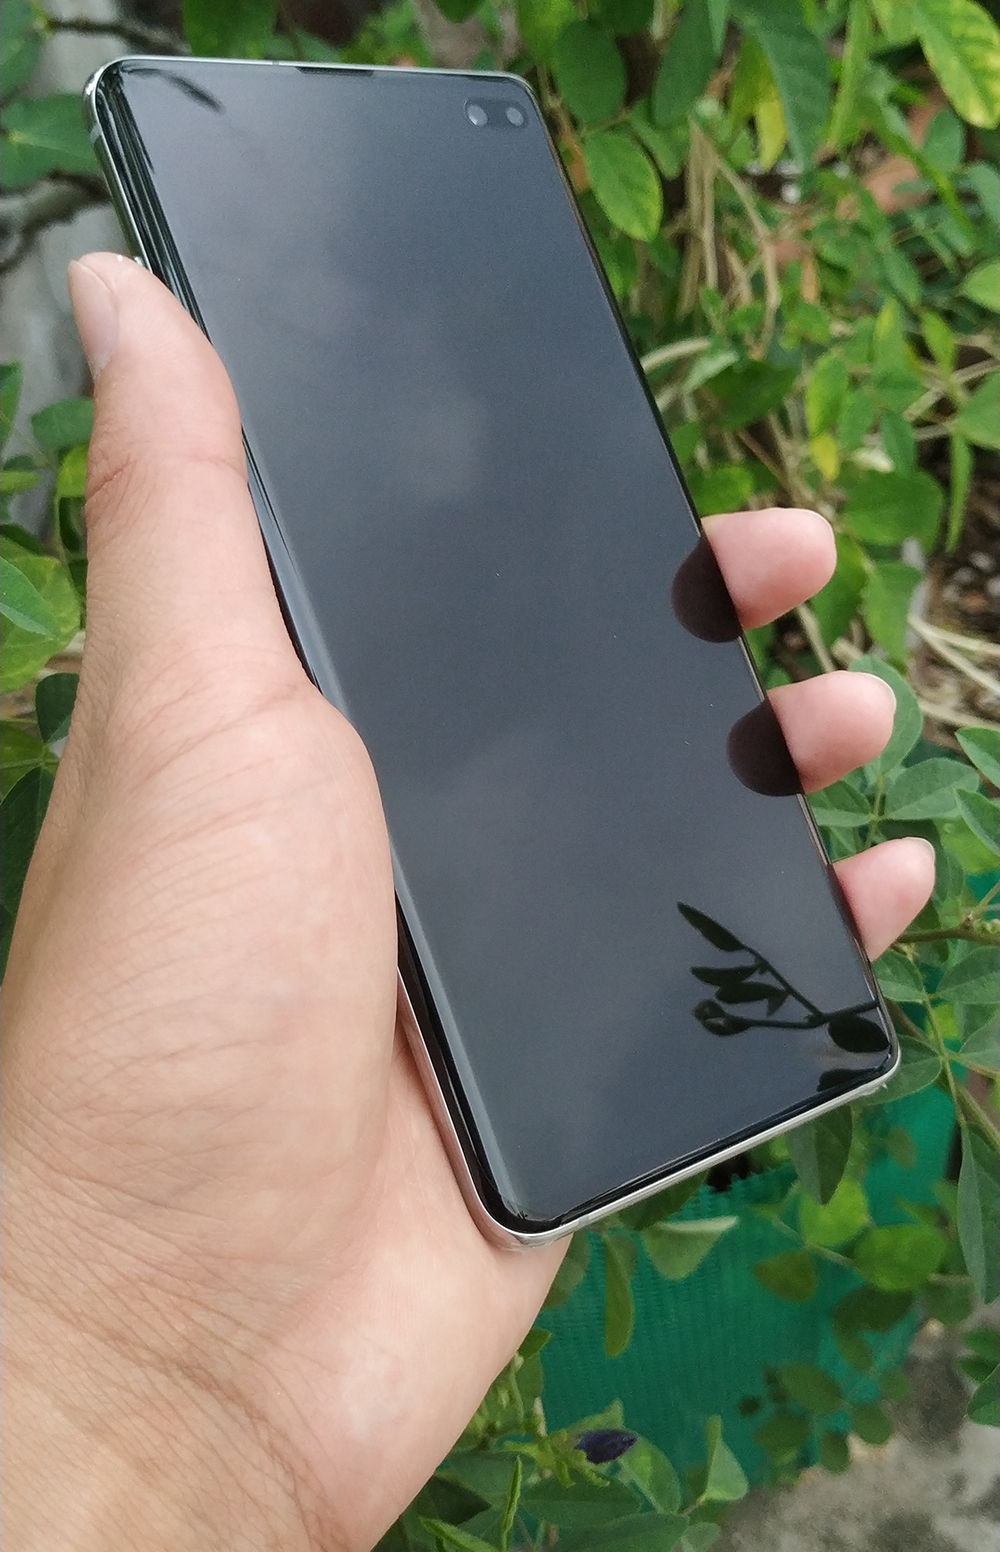 Review: The Galaxy S10+, a worthy 10th anniversary champ